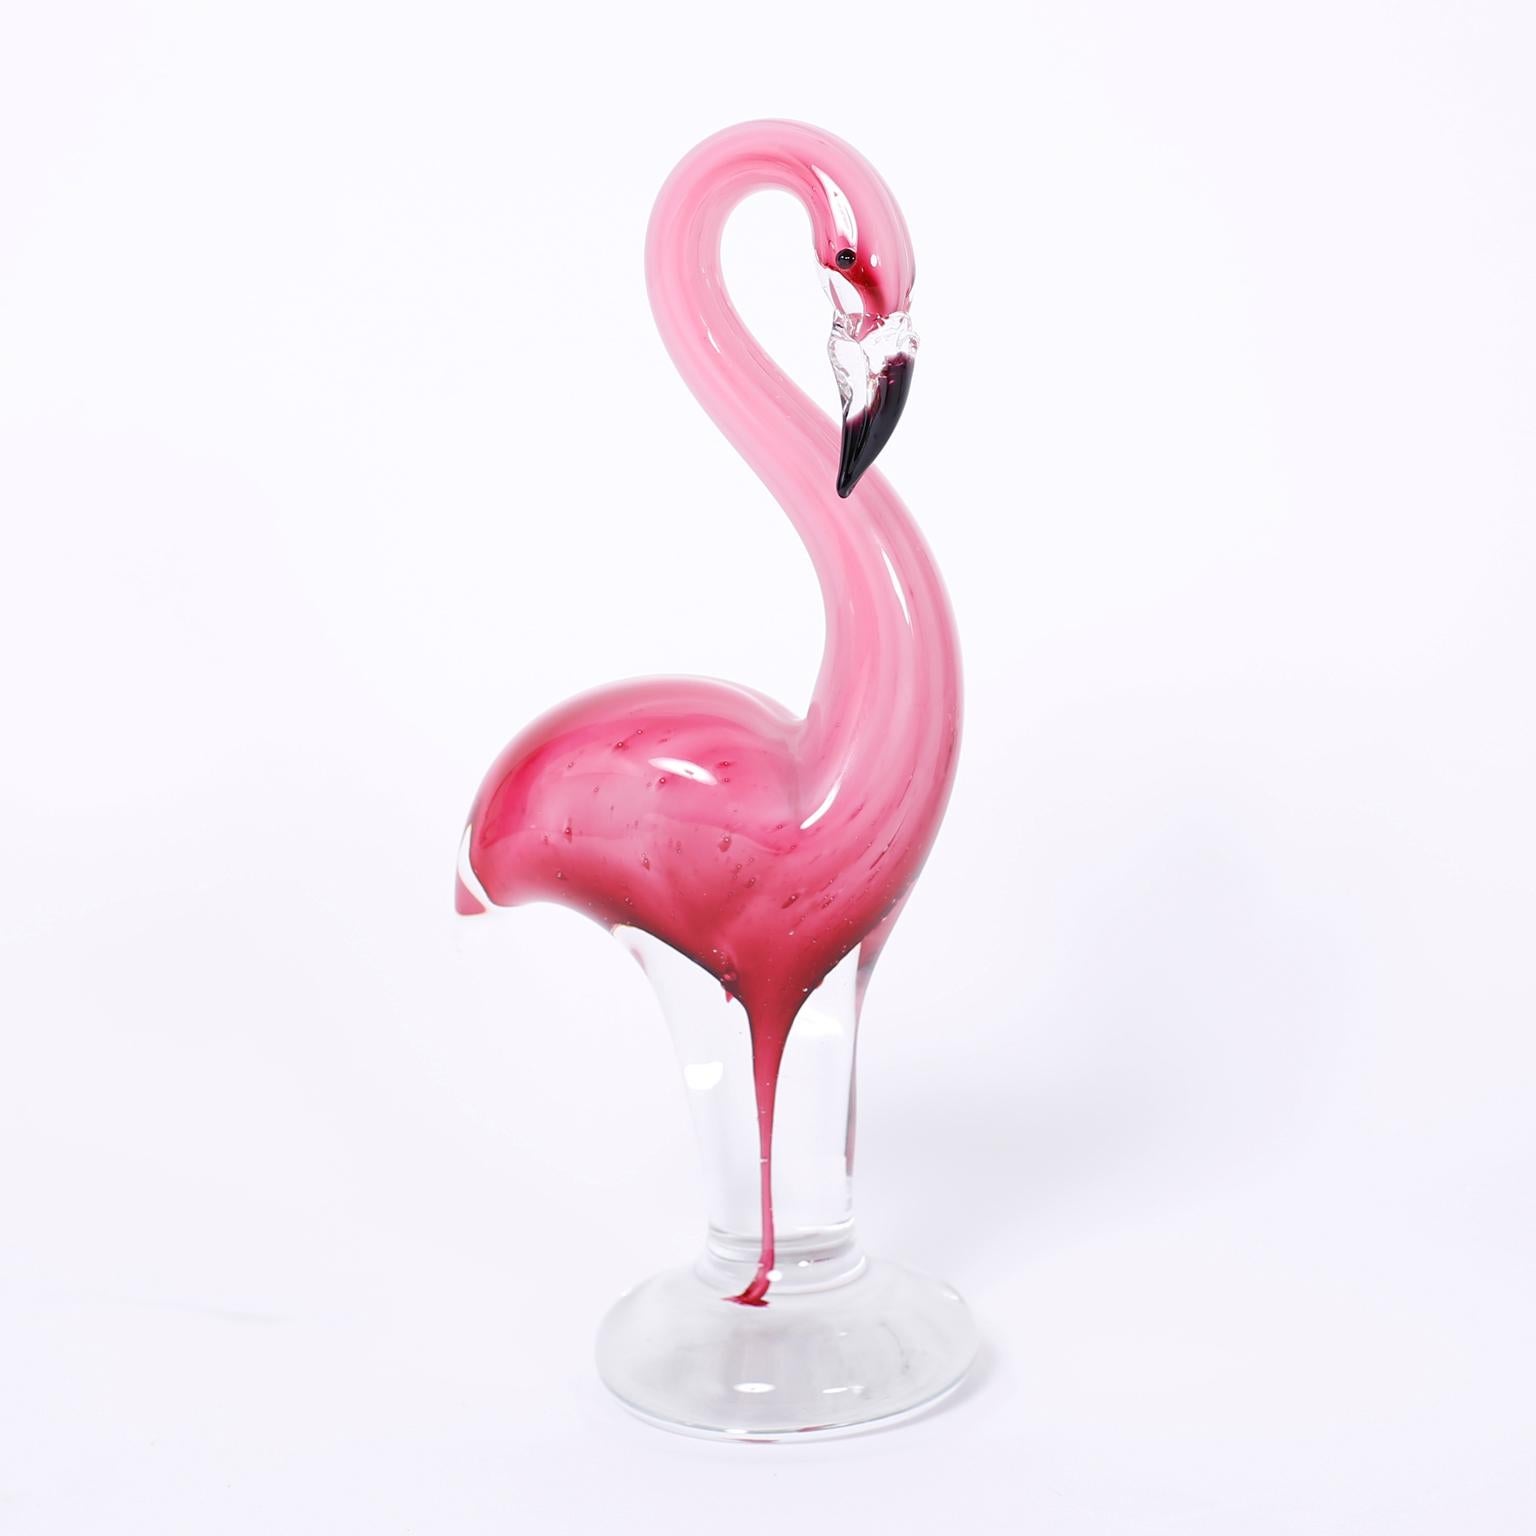 Three hand blown Murano glass flamingos each with graceful form and dramatic color. 

From left to right:

H: 12 W: 5 D: 3.5

H: 8 W: 4 D: 2.5

H: 12 W: 5 D: 3.